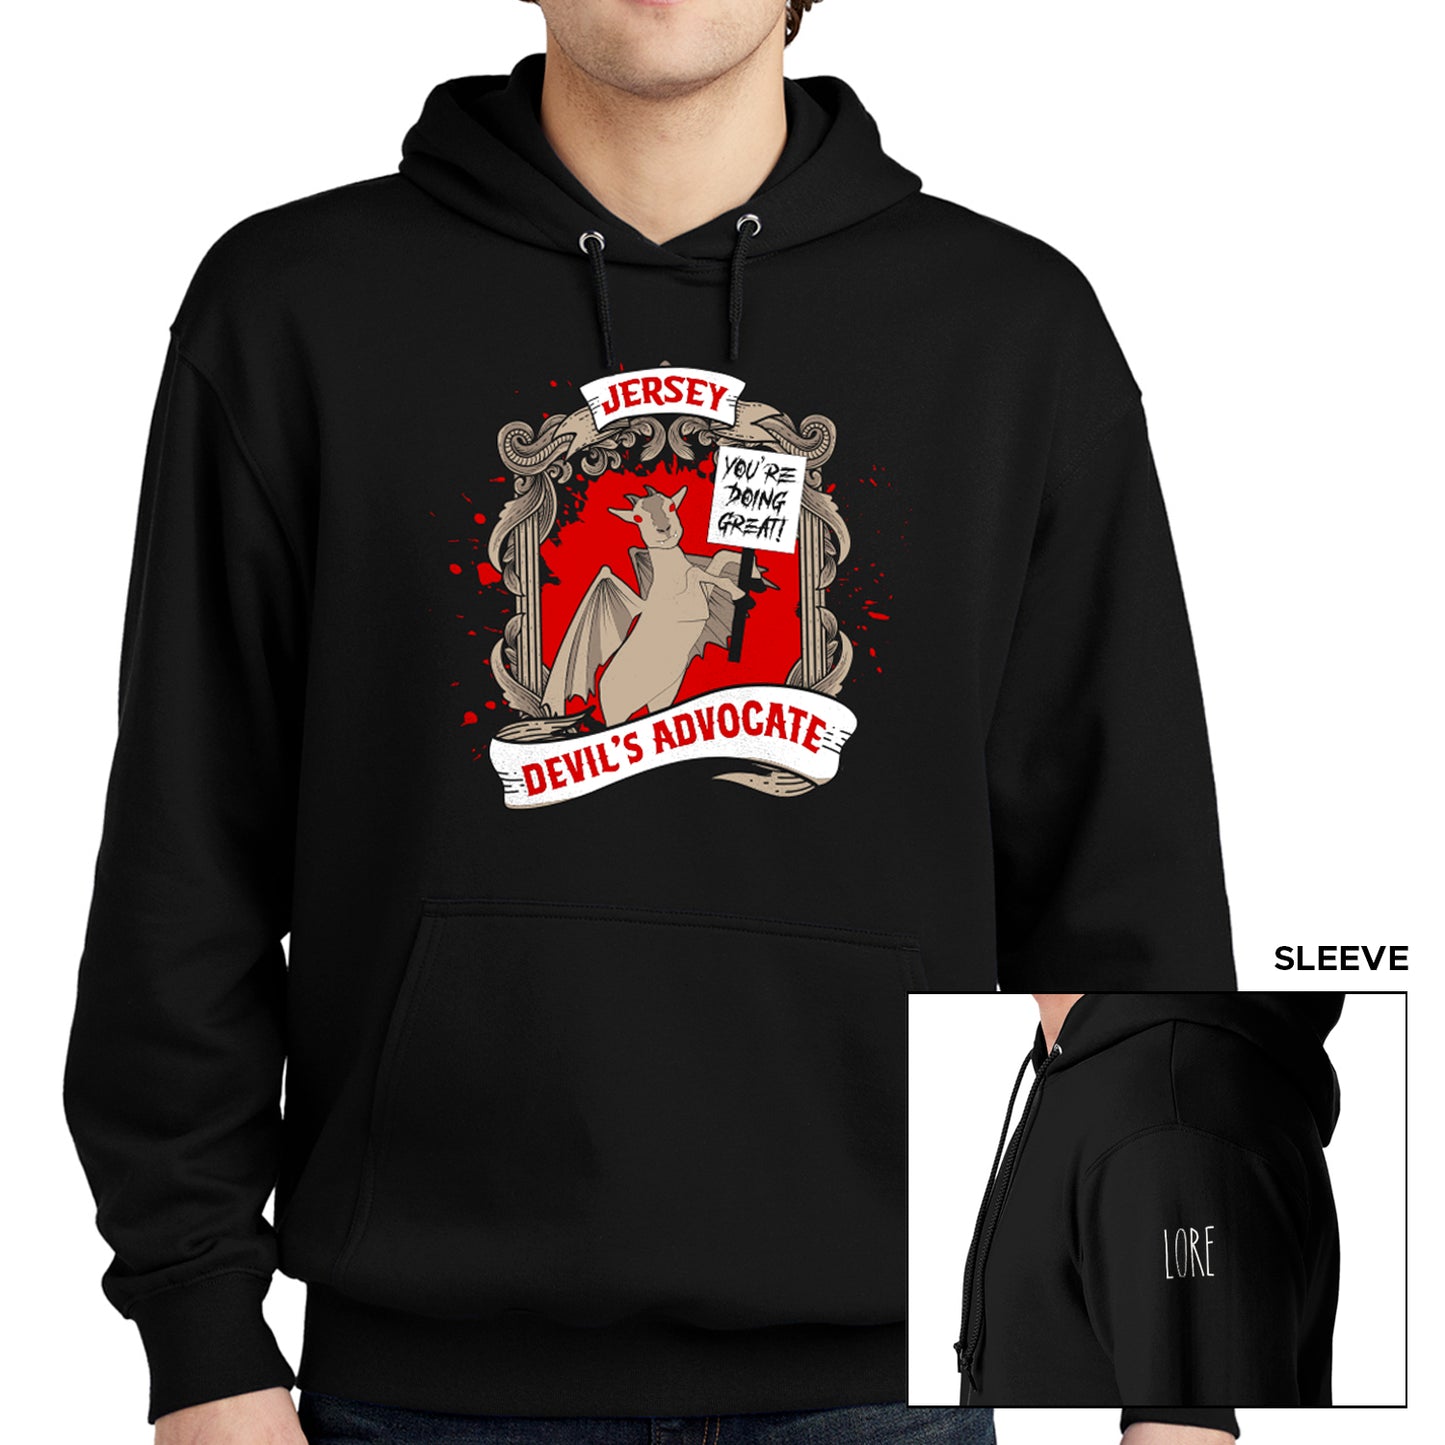 A male model wears a black hoodie sweatshirt with an illustration of a jersey devil goat holding up a sign that says "You're doing great!" along with a title adorning it that says "Jersey Devil's advocate. The left shoulder has the word LORE written in white.